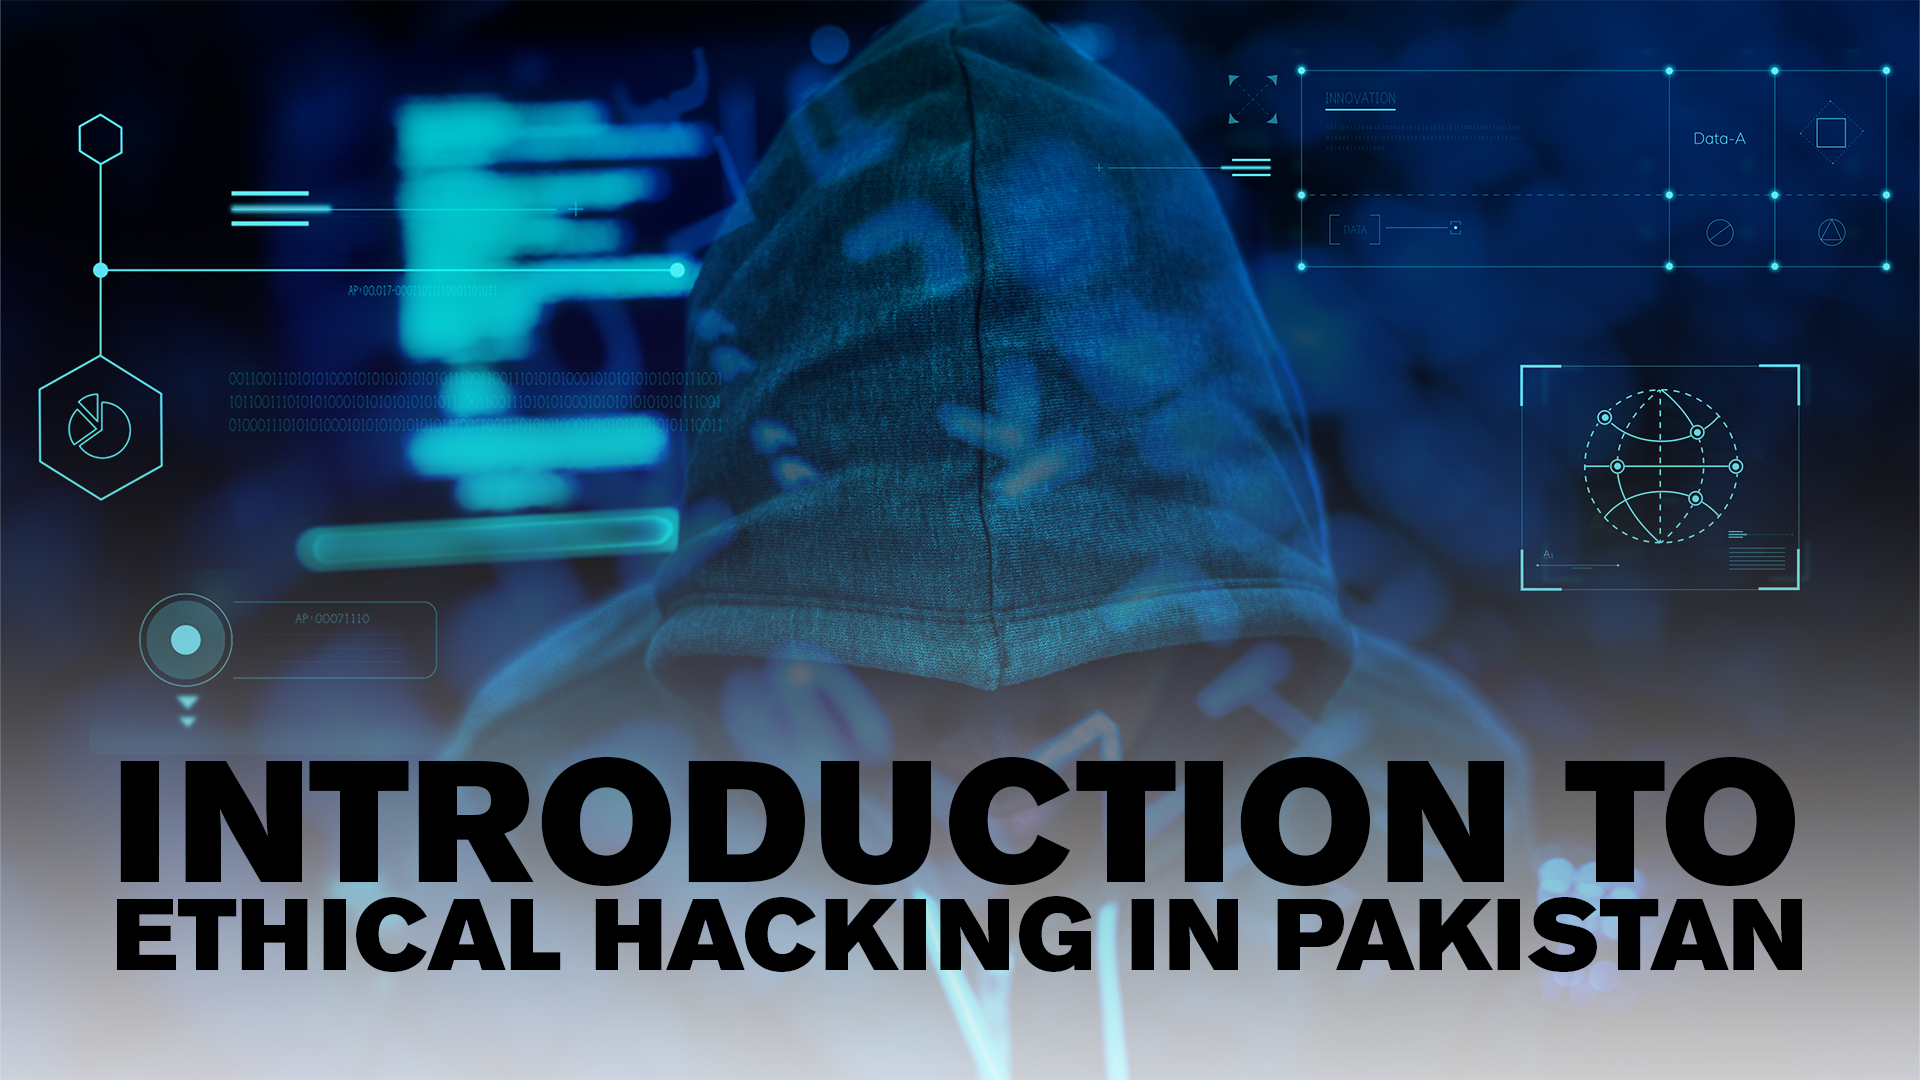 Introduction to Ethical Hacking in Pakistan